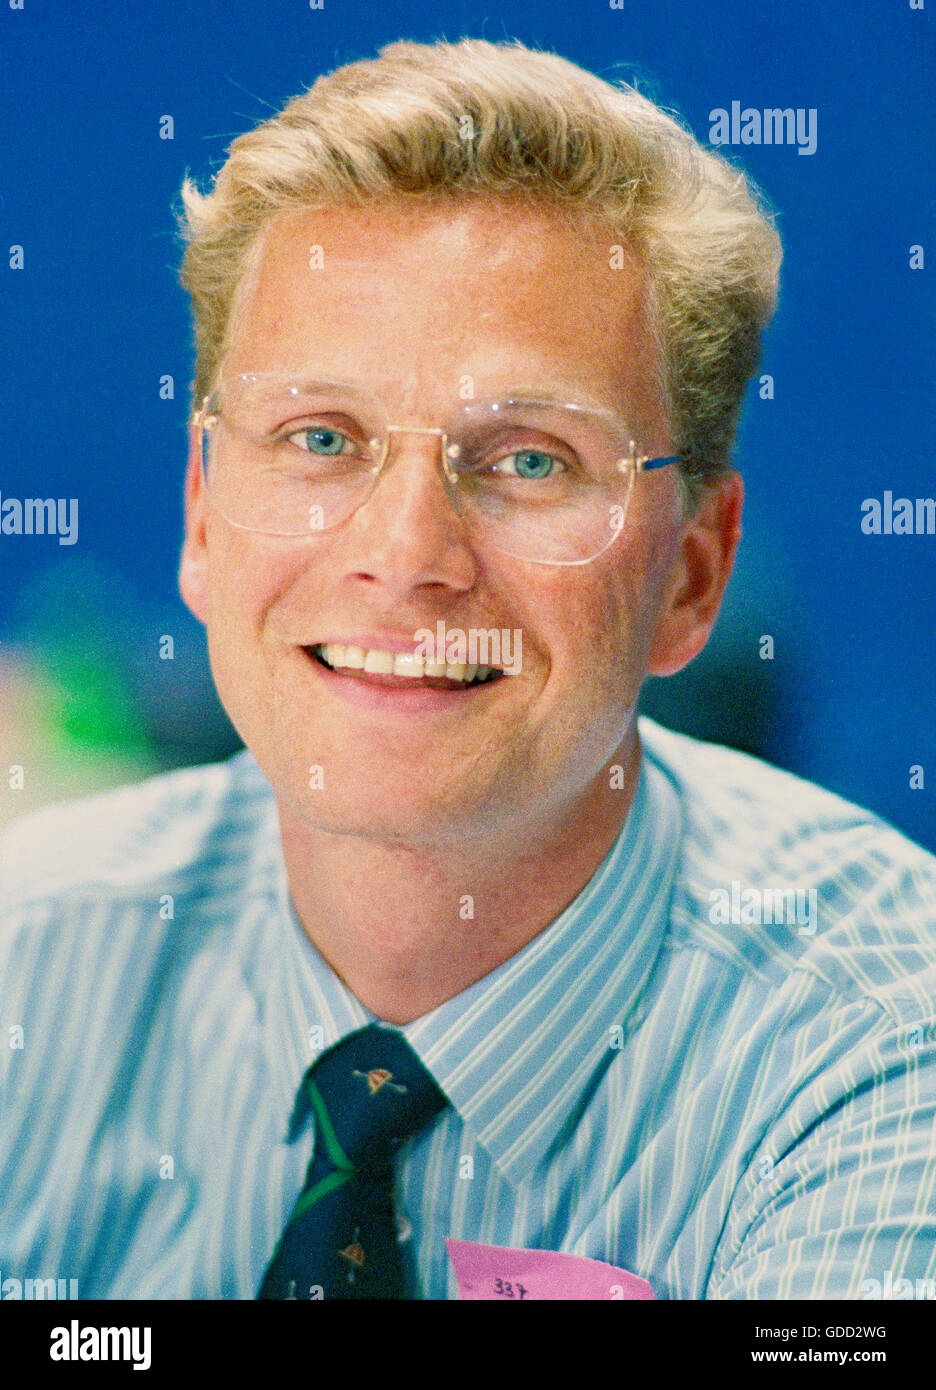 Westerwelle, Guido, 27.12.1961 - 18.3.2016, German politician (Liberal Democratic Party), federal chairman of the Young Liberals, portrait, during federal party convent of the Liberal Democratic Party, Kiel, Germany, 5.9.1987, Stock Photo